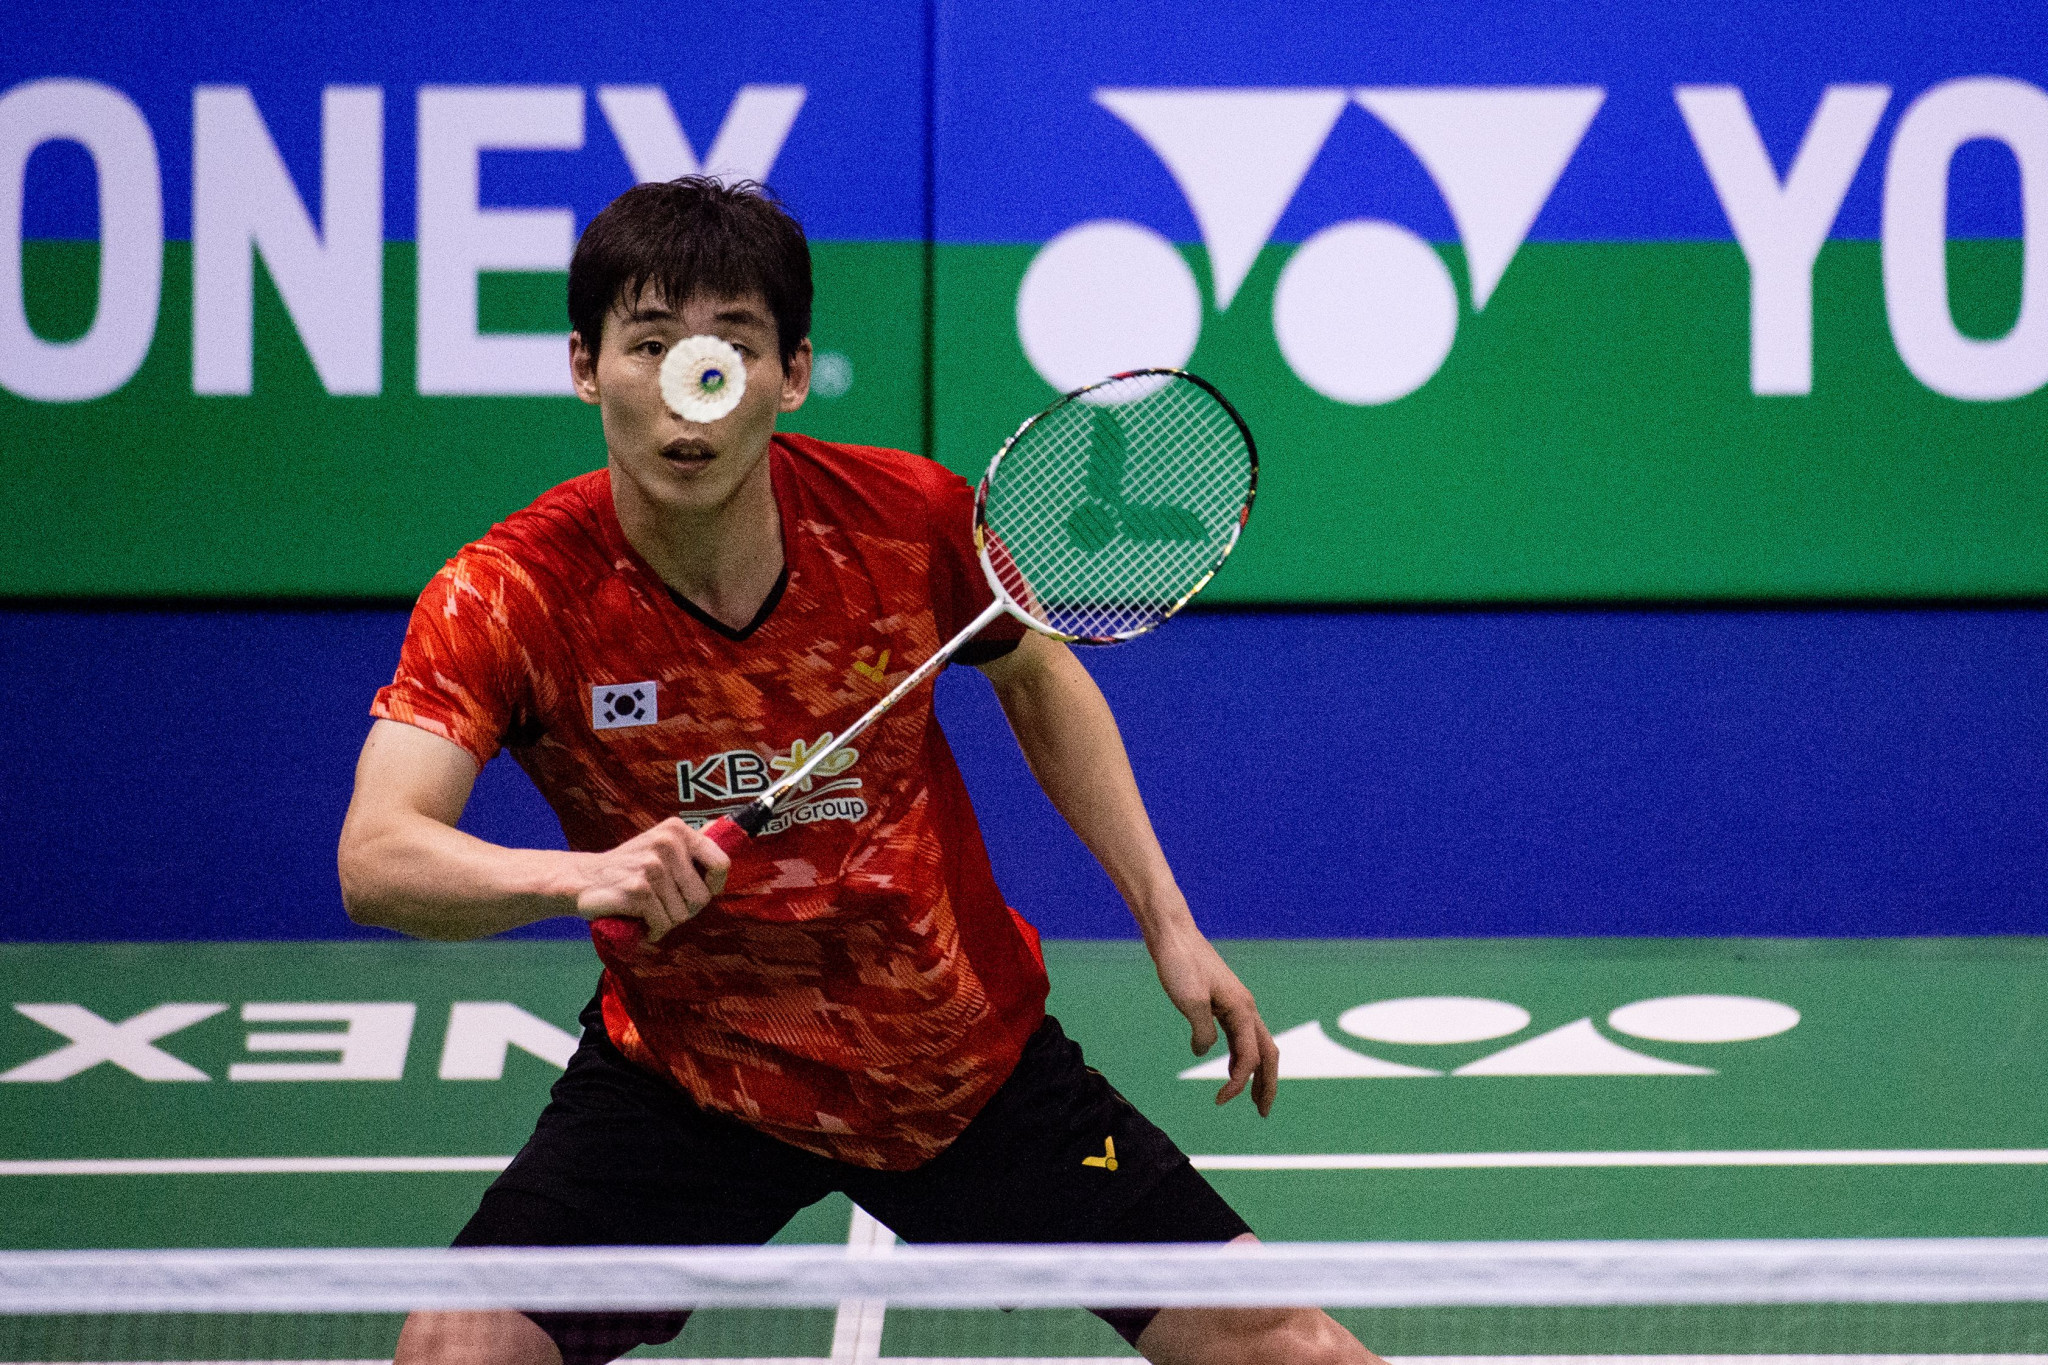 South Korea's Son Wan Ho beat world number one Kento Momota of Japan to progress to the final of the BWF Hong Kong Open ©Getty Images